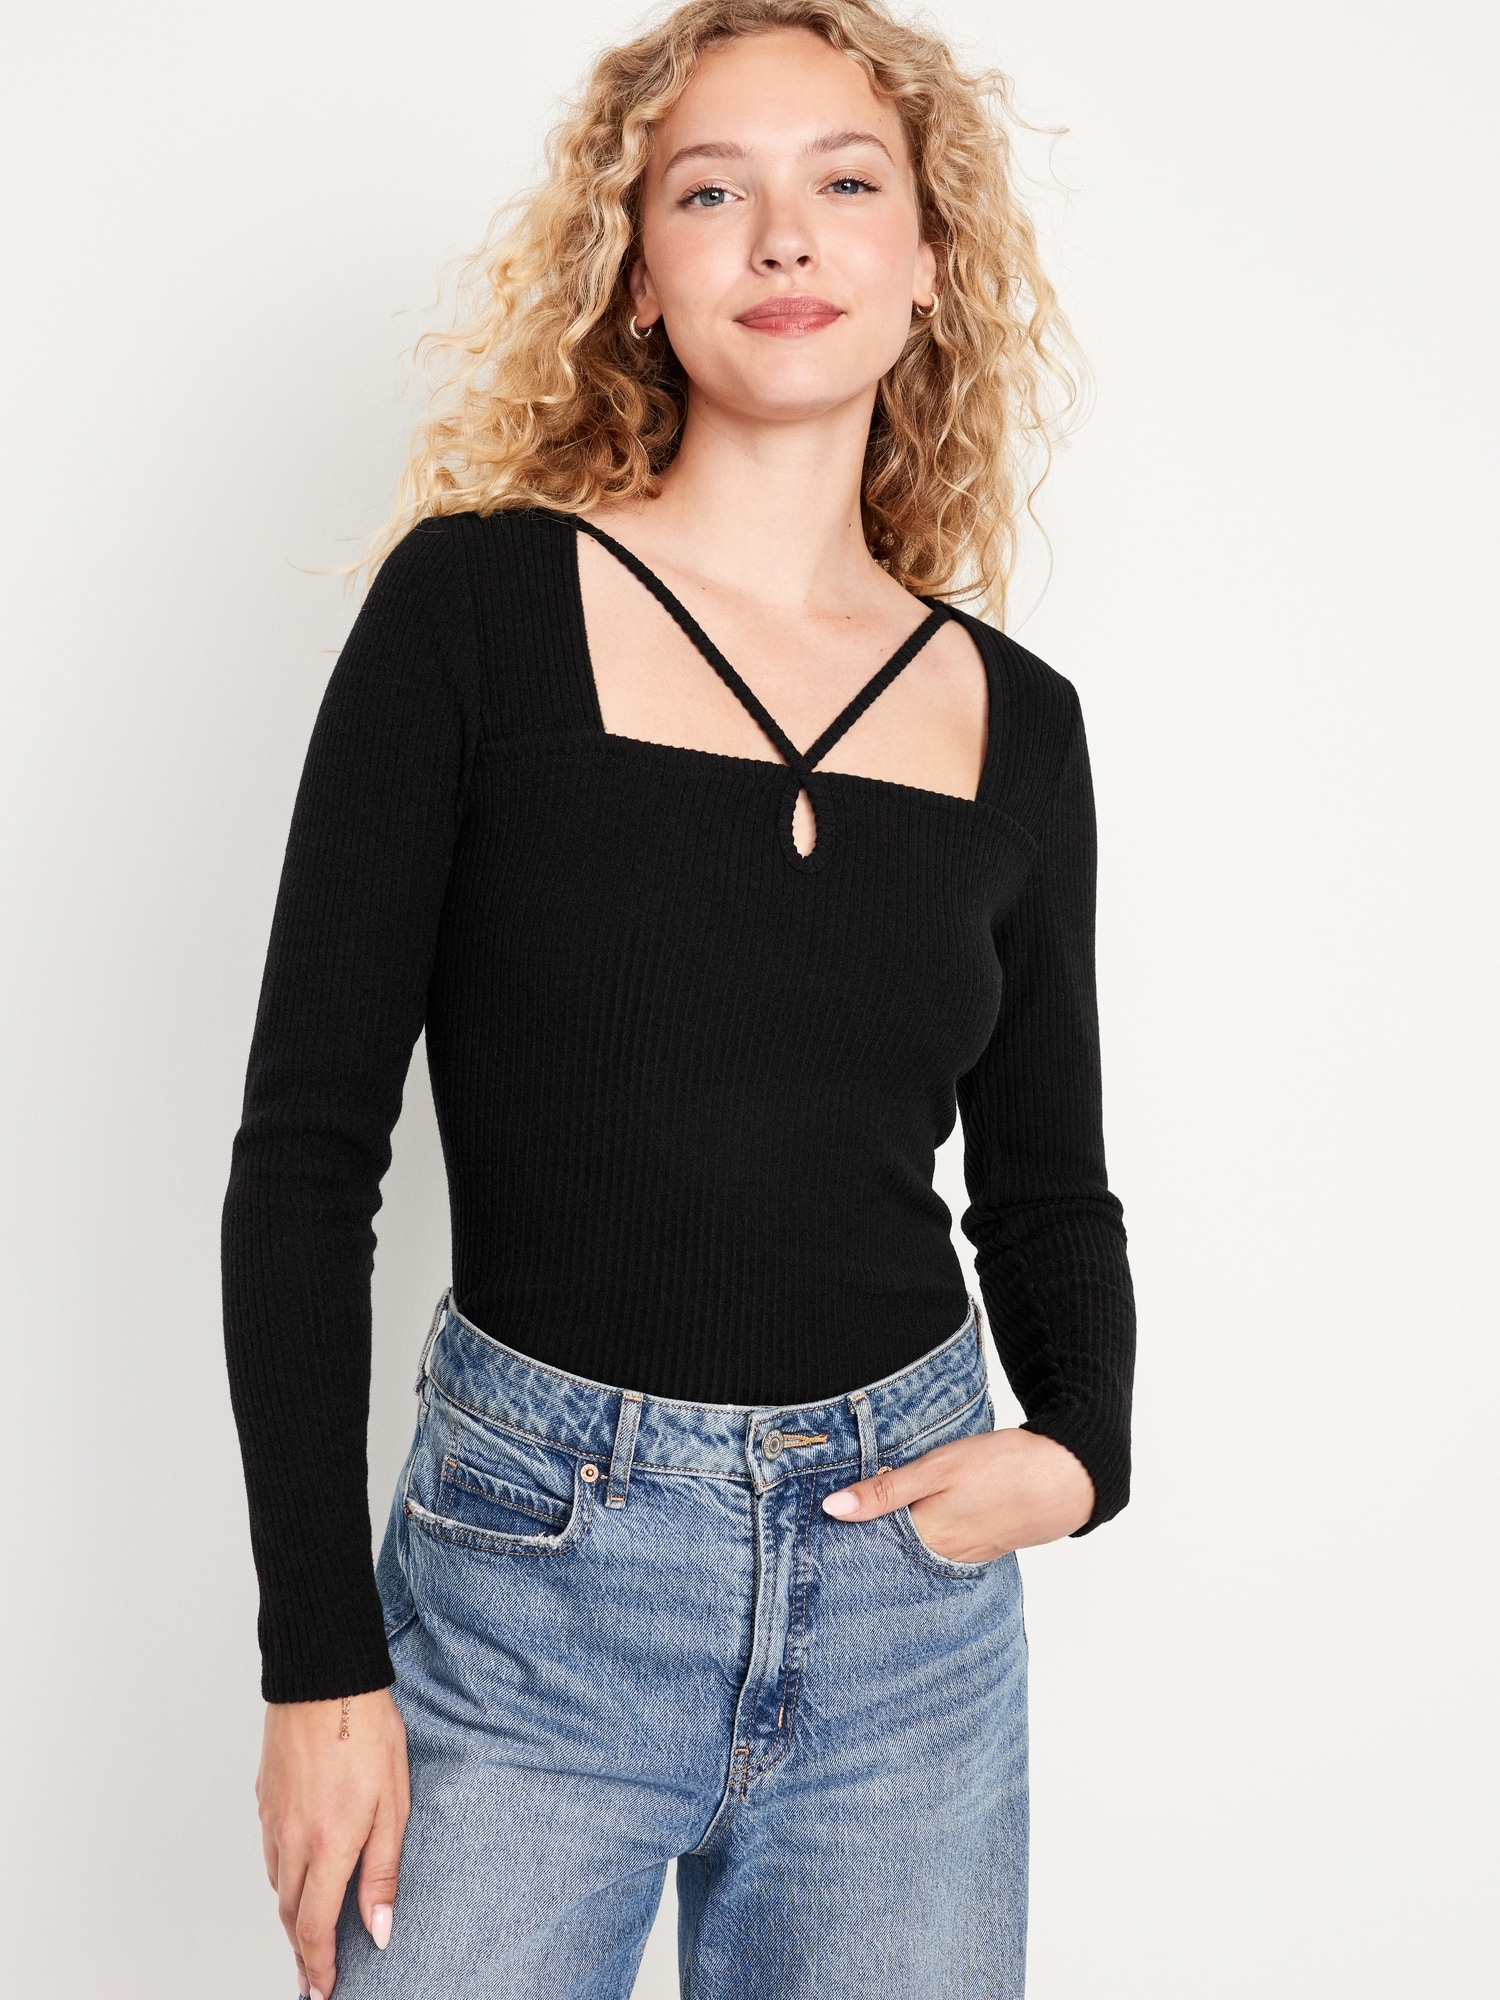 Fitted Old | Strappy Women for Top Keyhole Navy Long-Sleeve